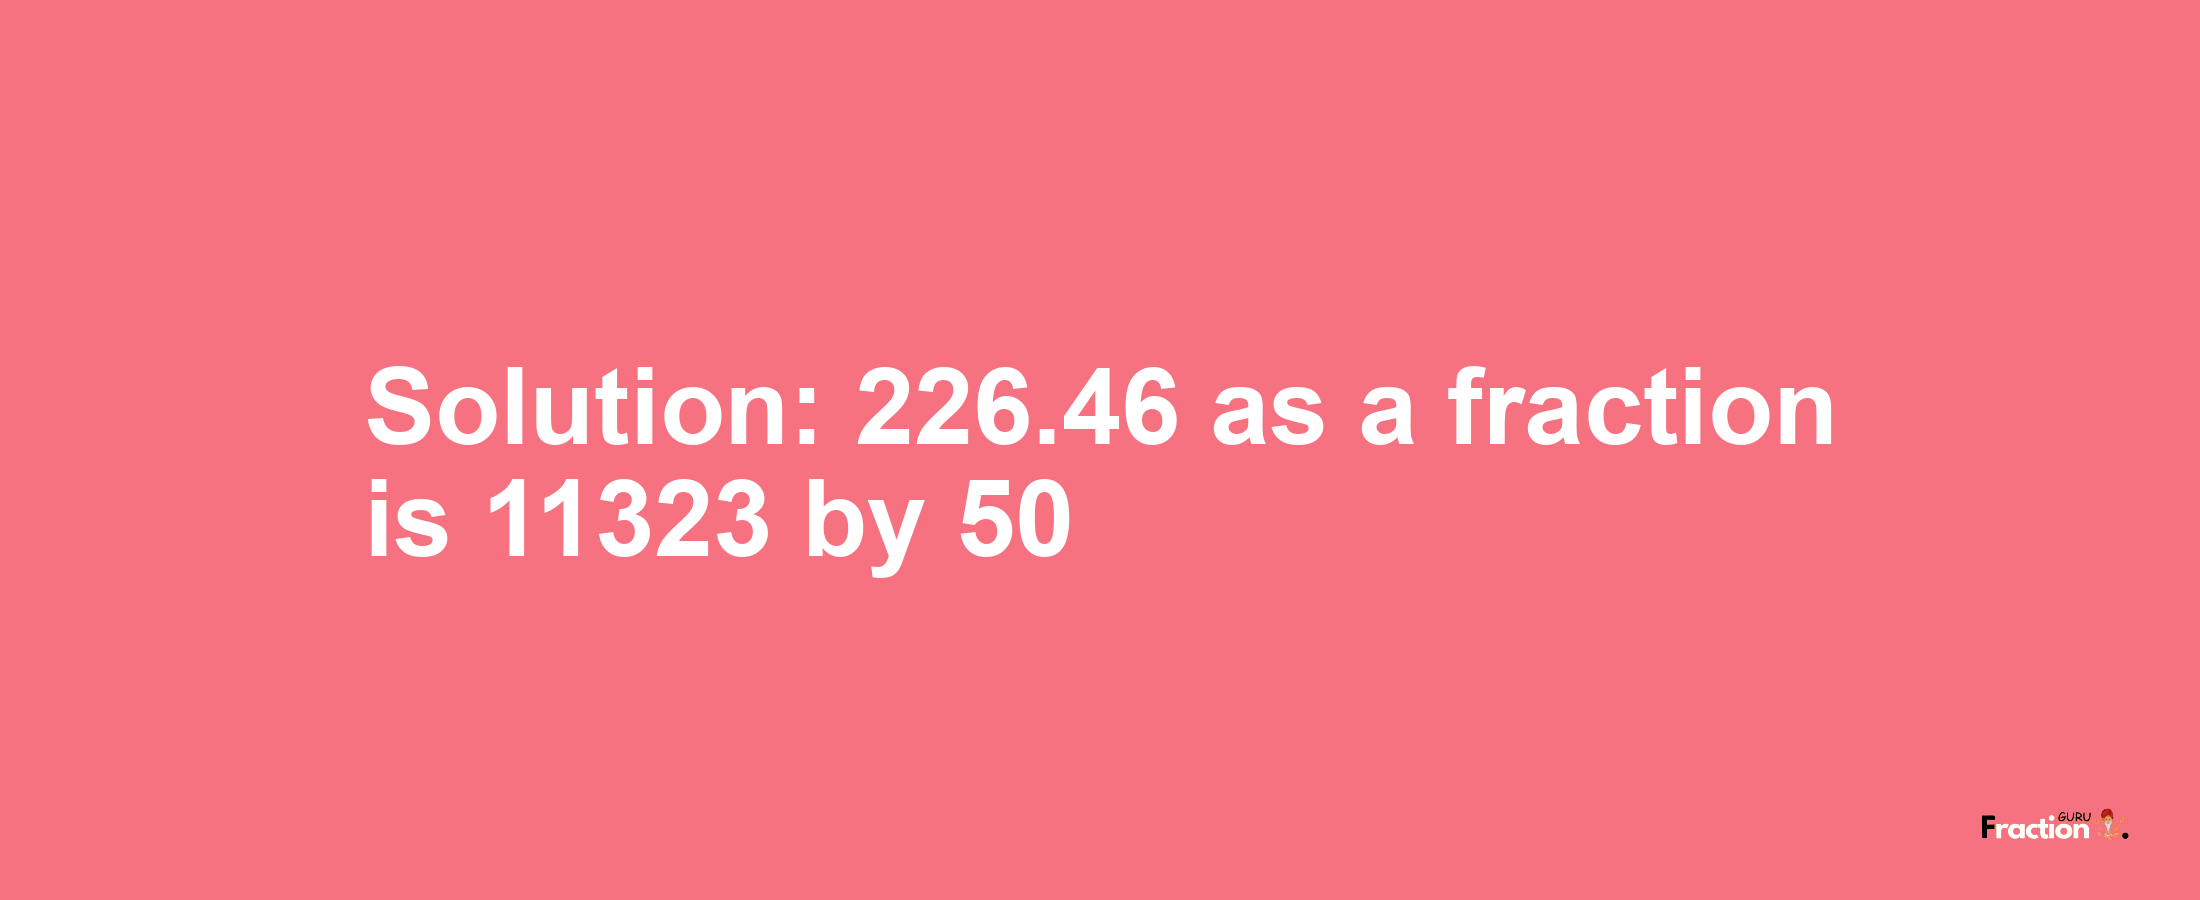 Solution:226.46 as a fraction is 11323/50